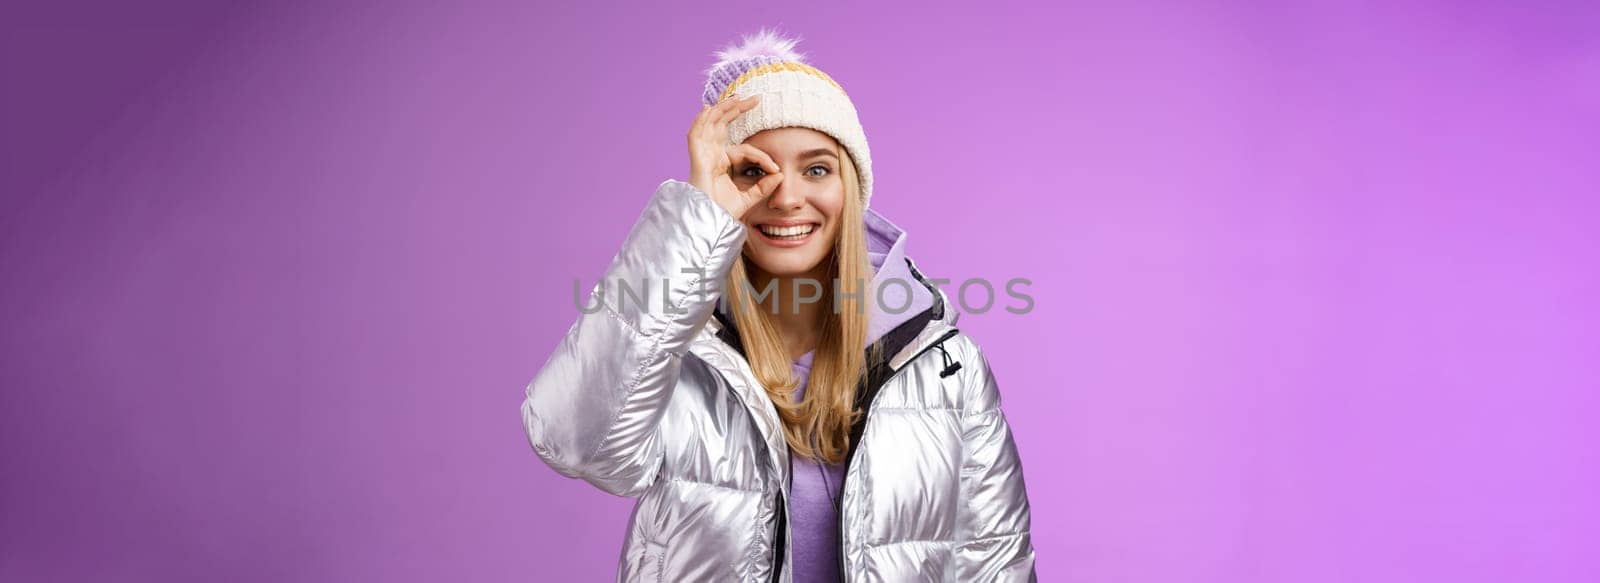 Lifestyle. Stylish carefree european female student enjoying vacation trip snowy country wearing warm trendy silver jacket knitted hat show okay ok awesome gesture smiling having fun recommend resort.